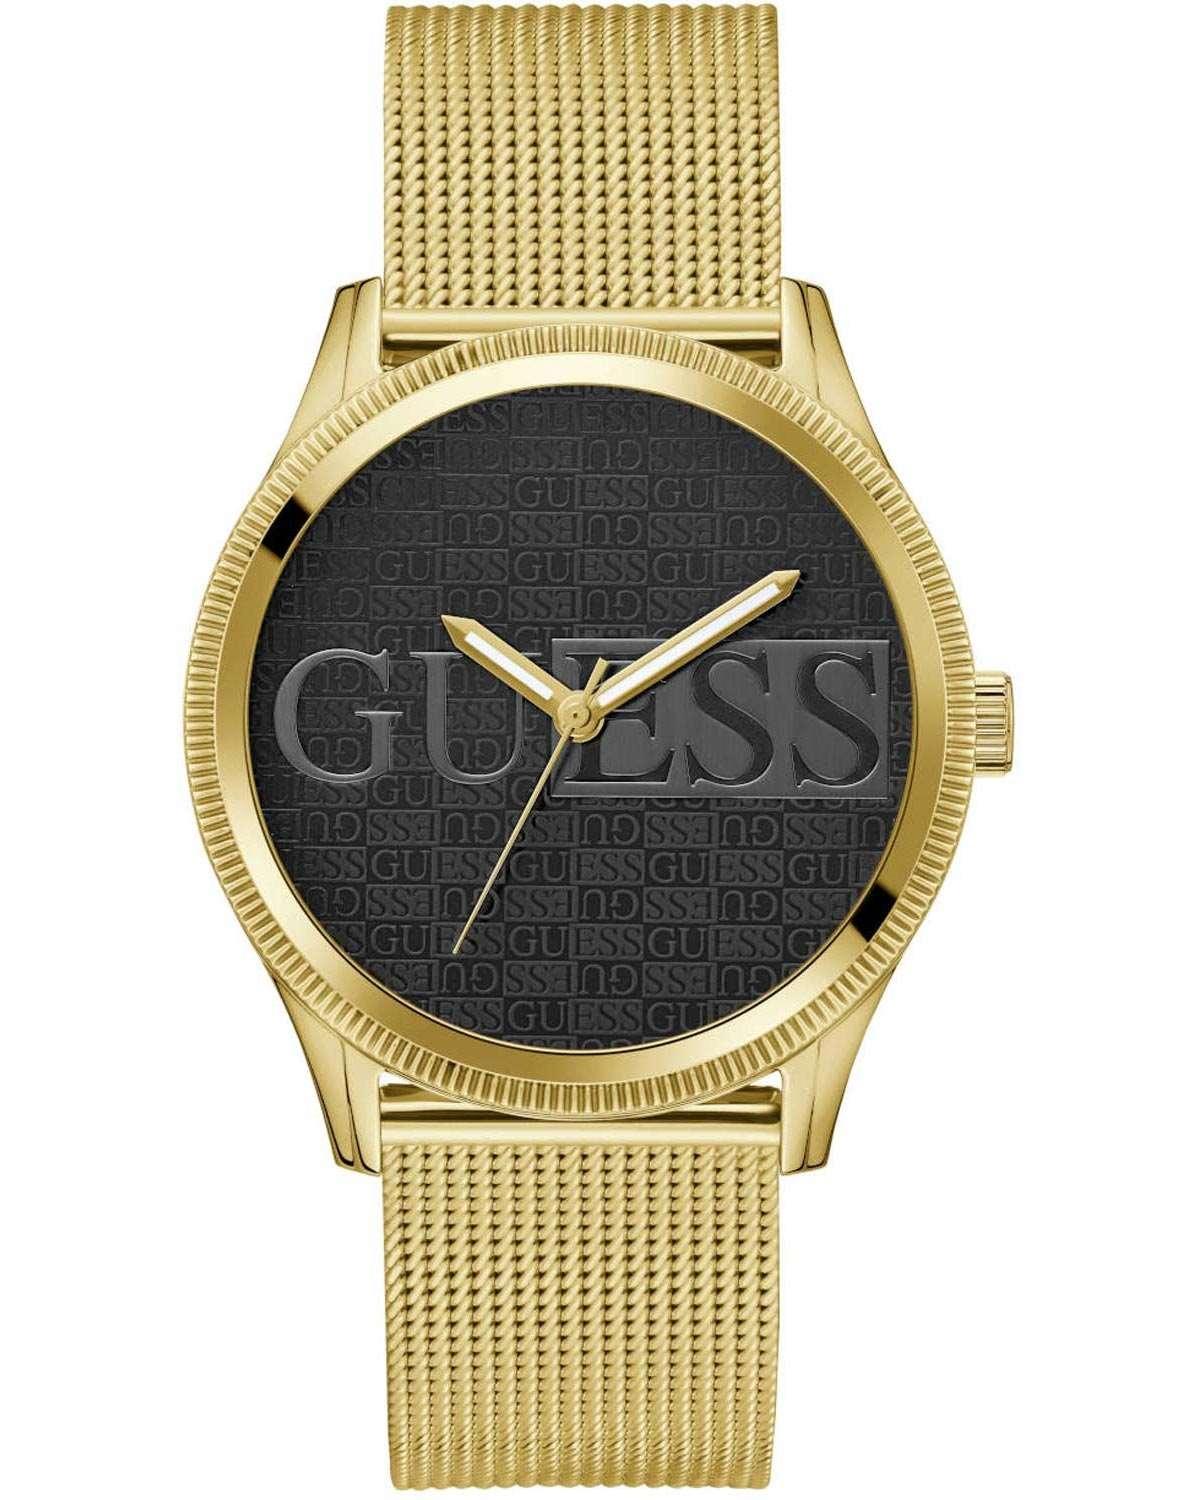 GUESS Reputation - GW0710G2, Gold case with Stainless Steel Bracelet